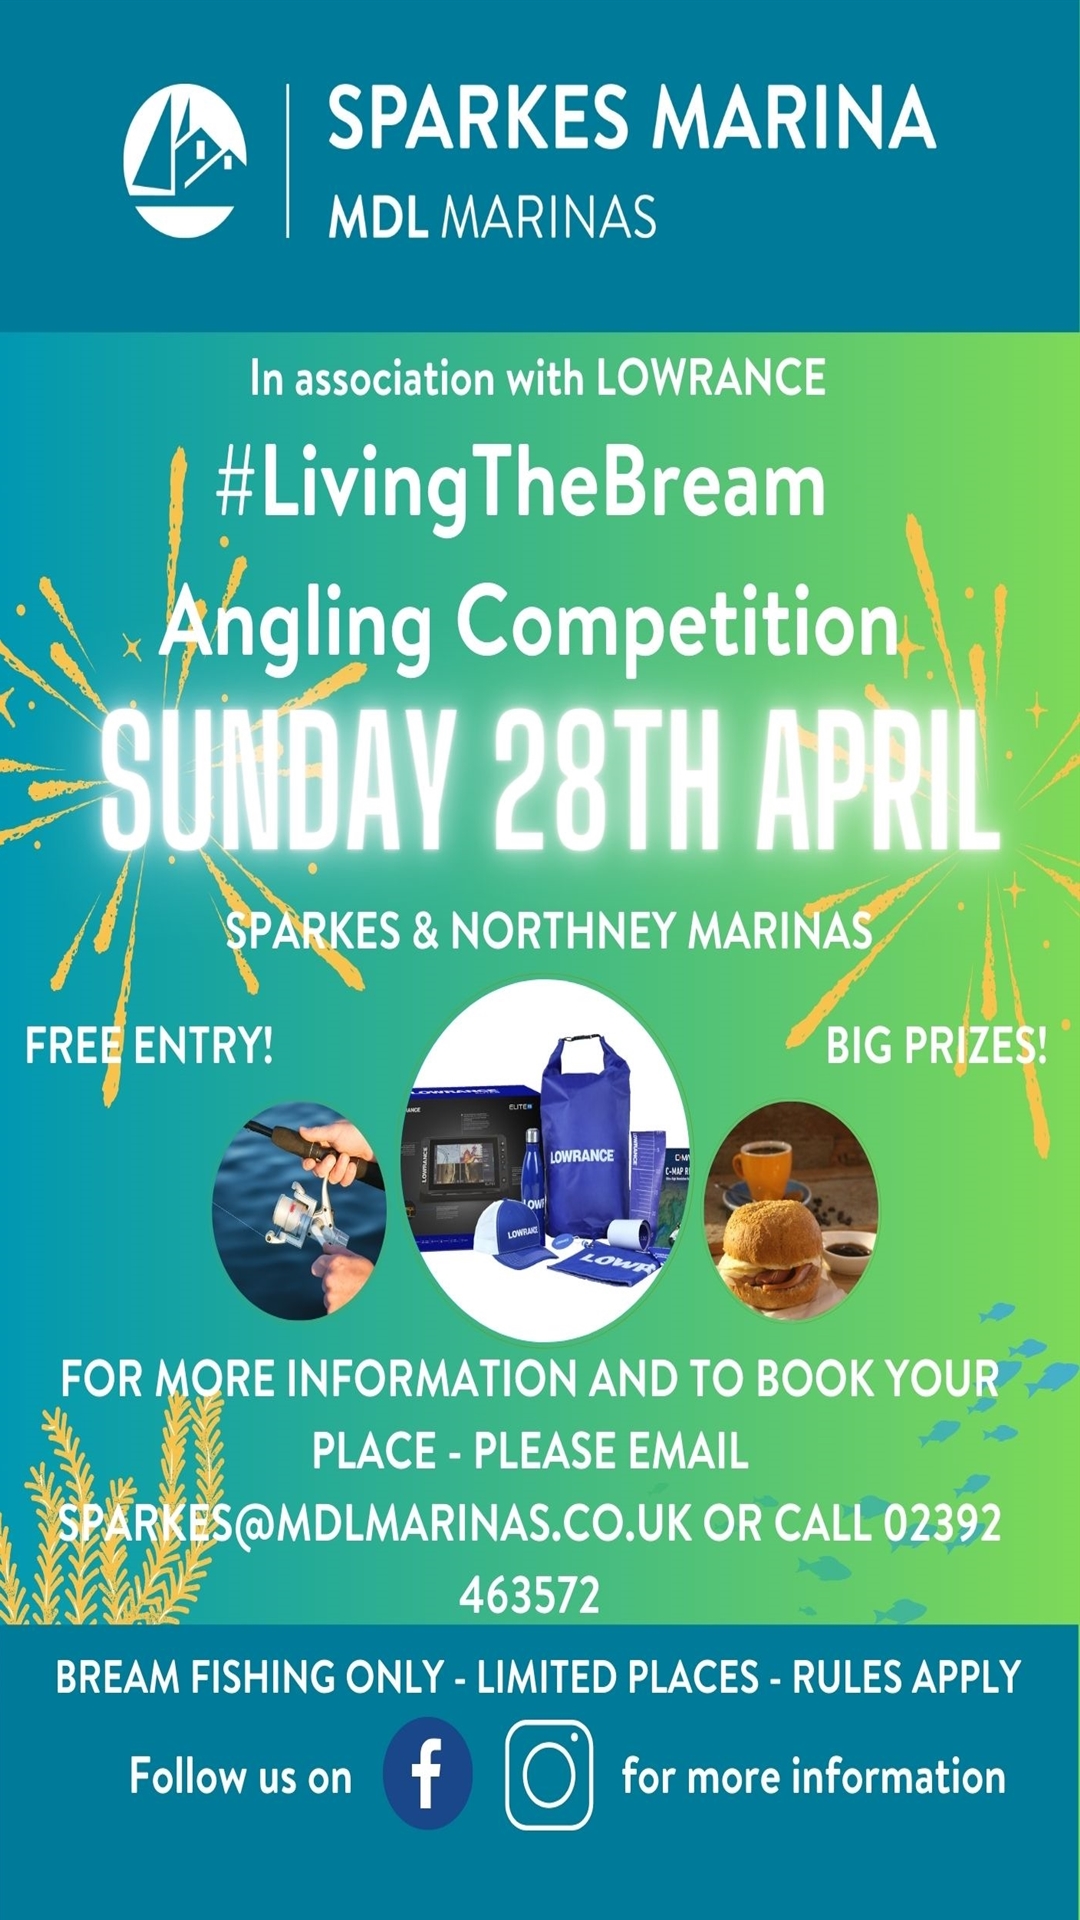 Sparkes Marina #LivingTheBream Angling Competition